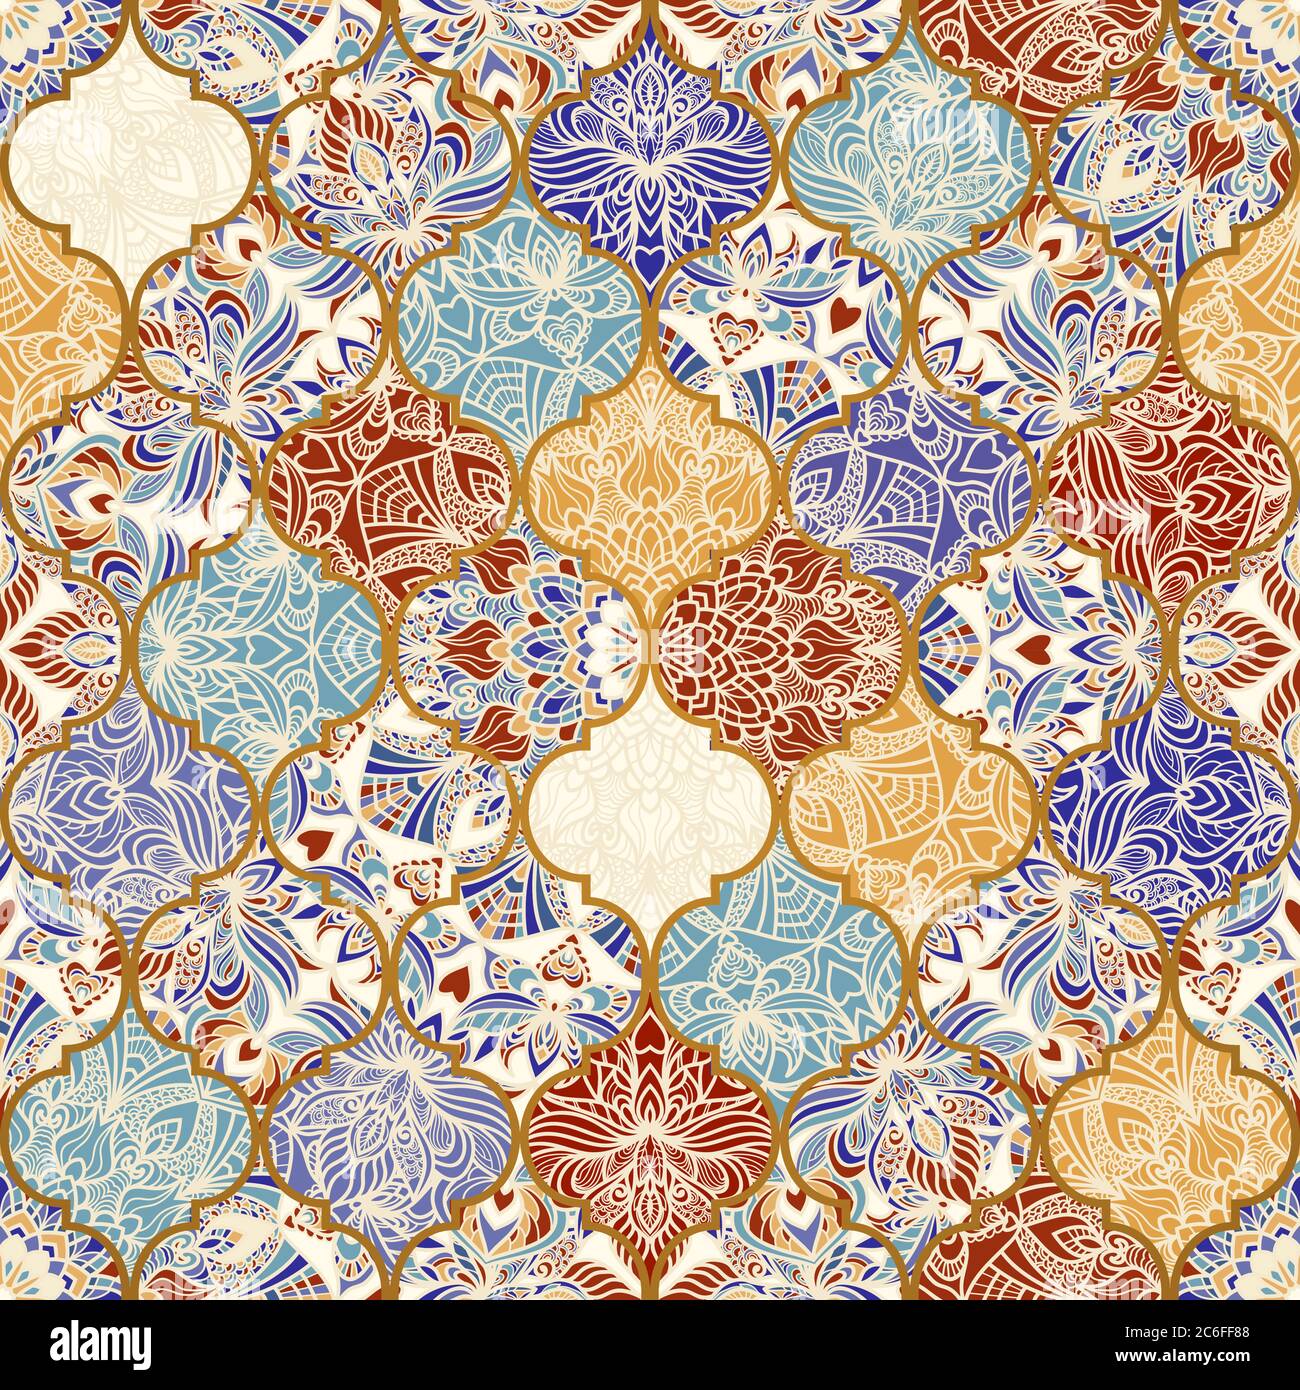 Islam, Arabic, Indian, ottoman motifs. Endless pattern can be used for ceramic tile, wallpaper, linoleum, textile, web page background. Vector Stock Vector